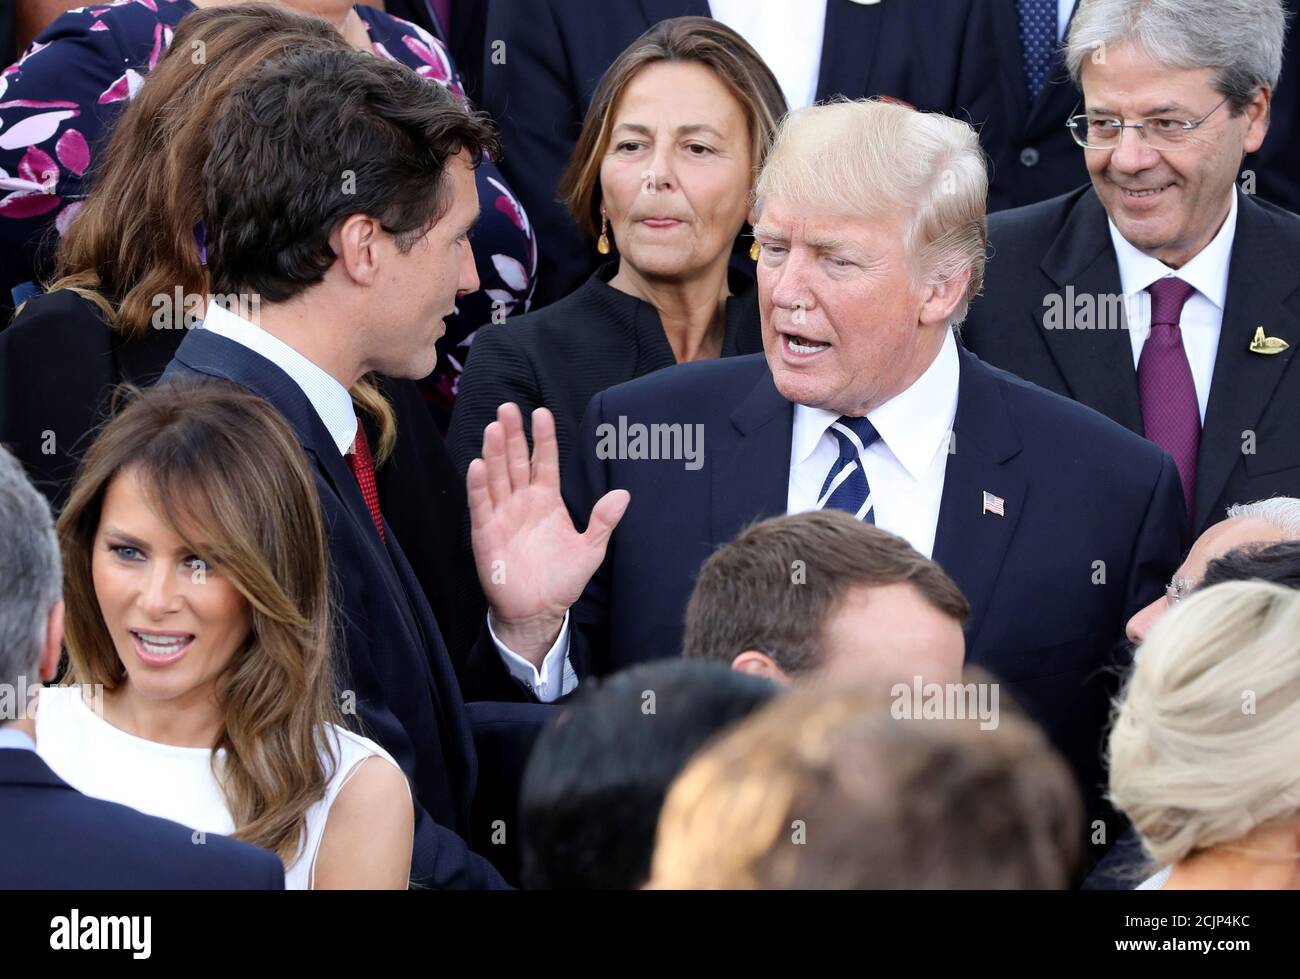 US President Donald Trump (C) talks with Canada's Prime Minister Justin  Trudeau (L) and his wife of Canada's Prime Minister Sophie Gregoire (Hidden  behind) as US First Lady Melania Trump (front L)